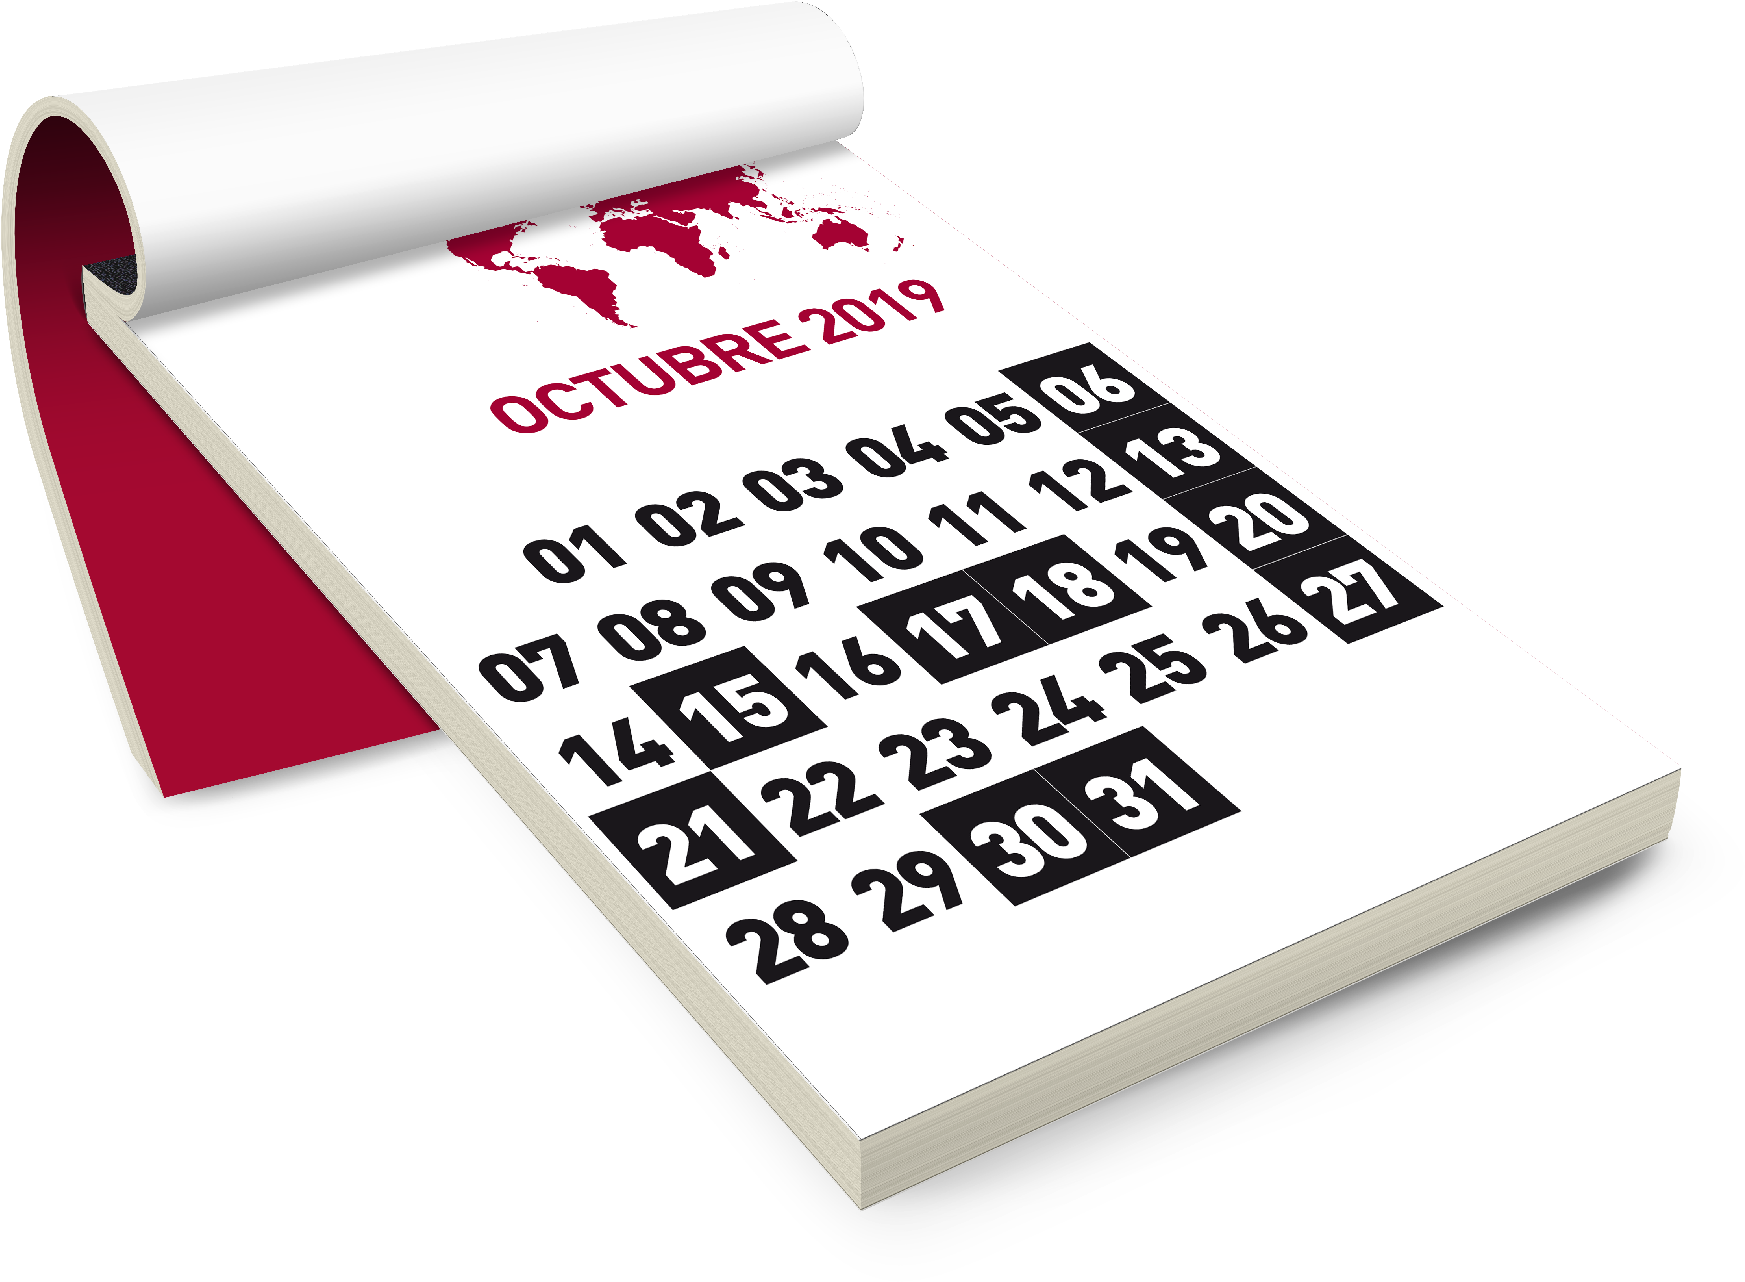 A Calendar On A Red And White Cover